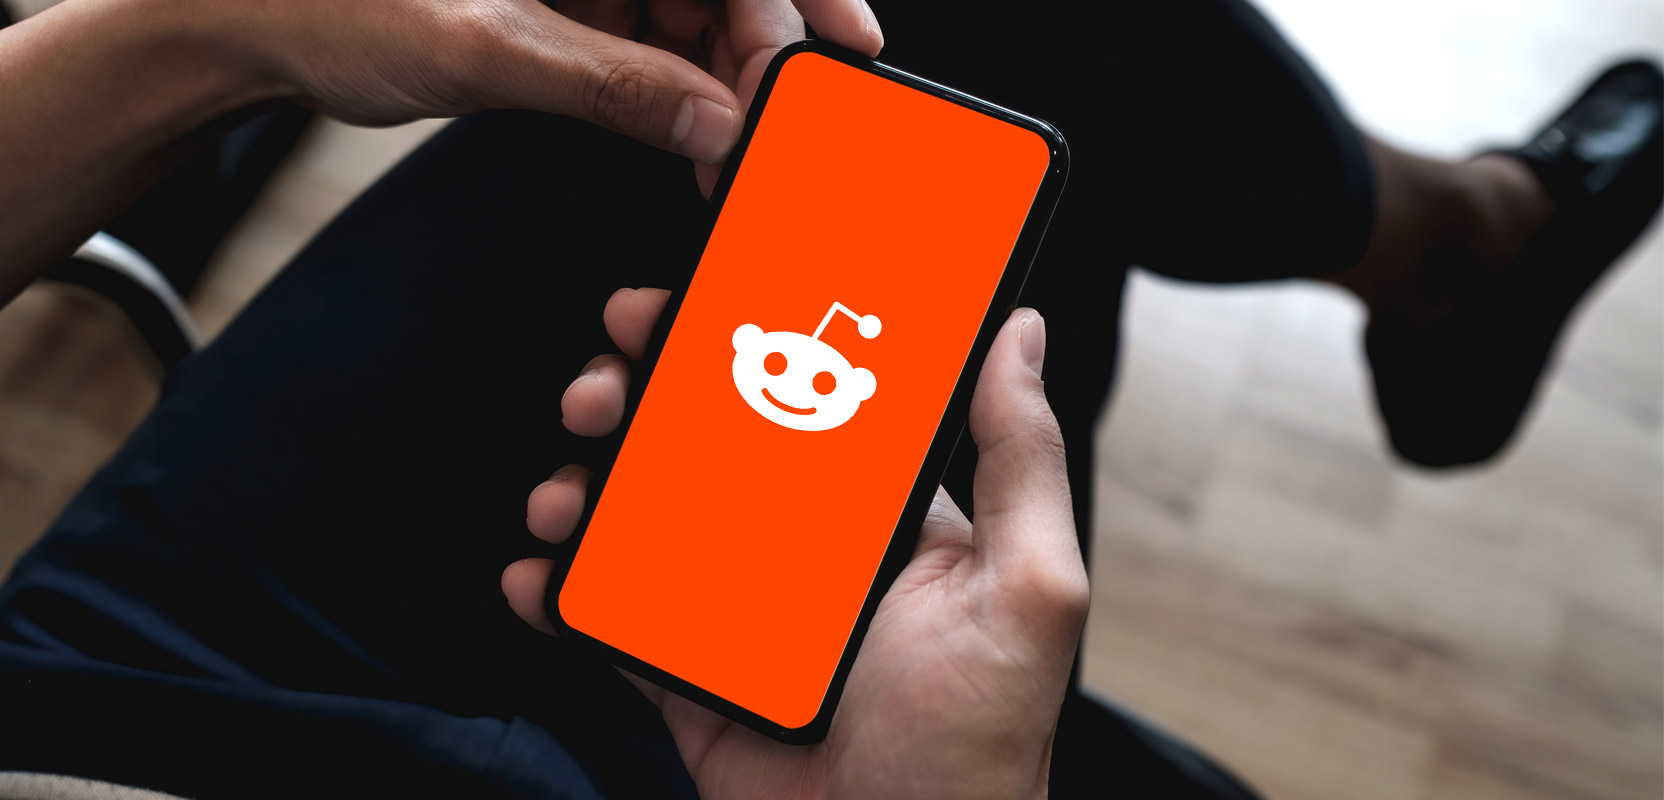 Closeup of someone holding a smartphone with the Reddit logo on it